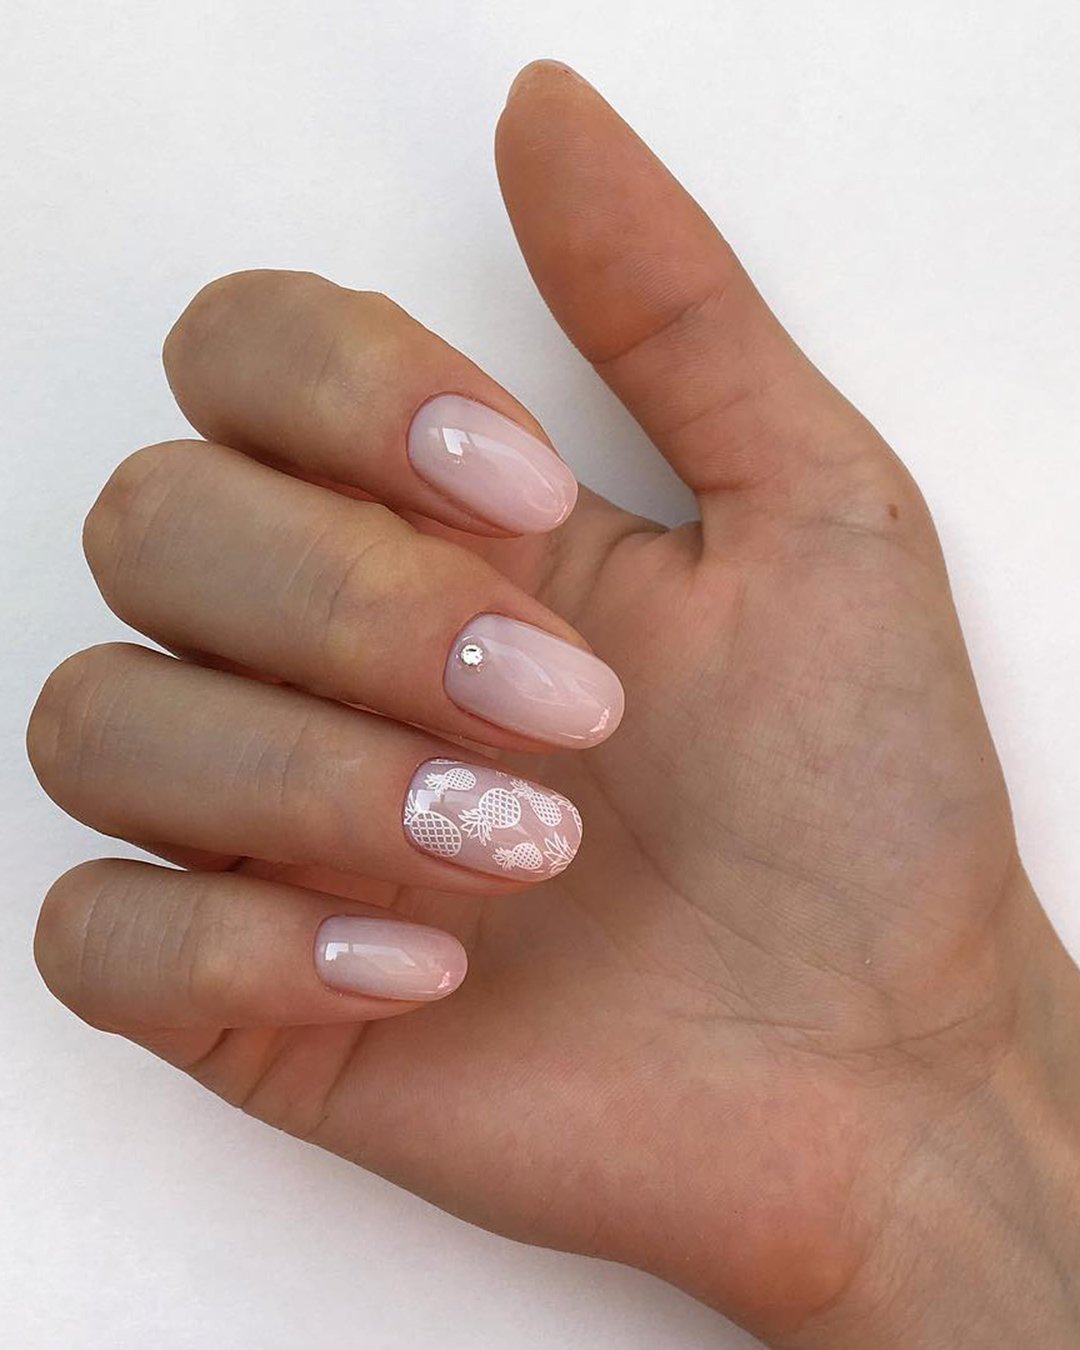 pink and white nails wedding nude and tropical pattern denisova_nailartist